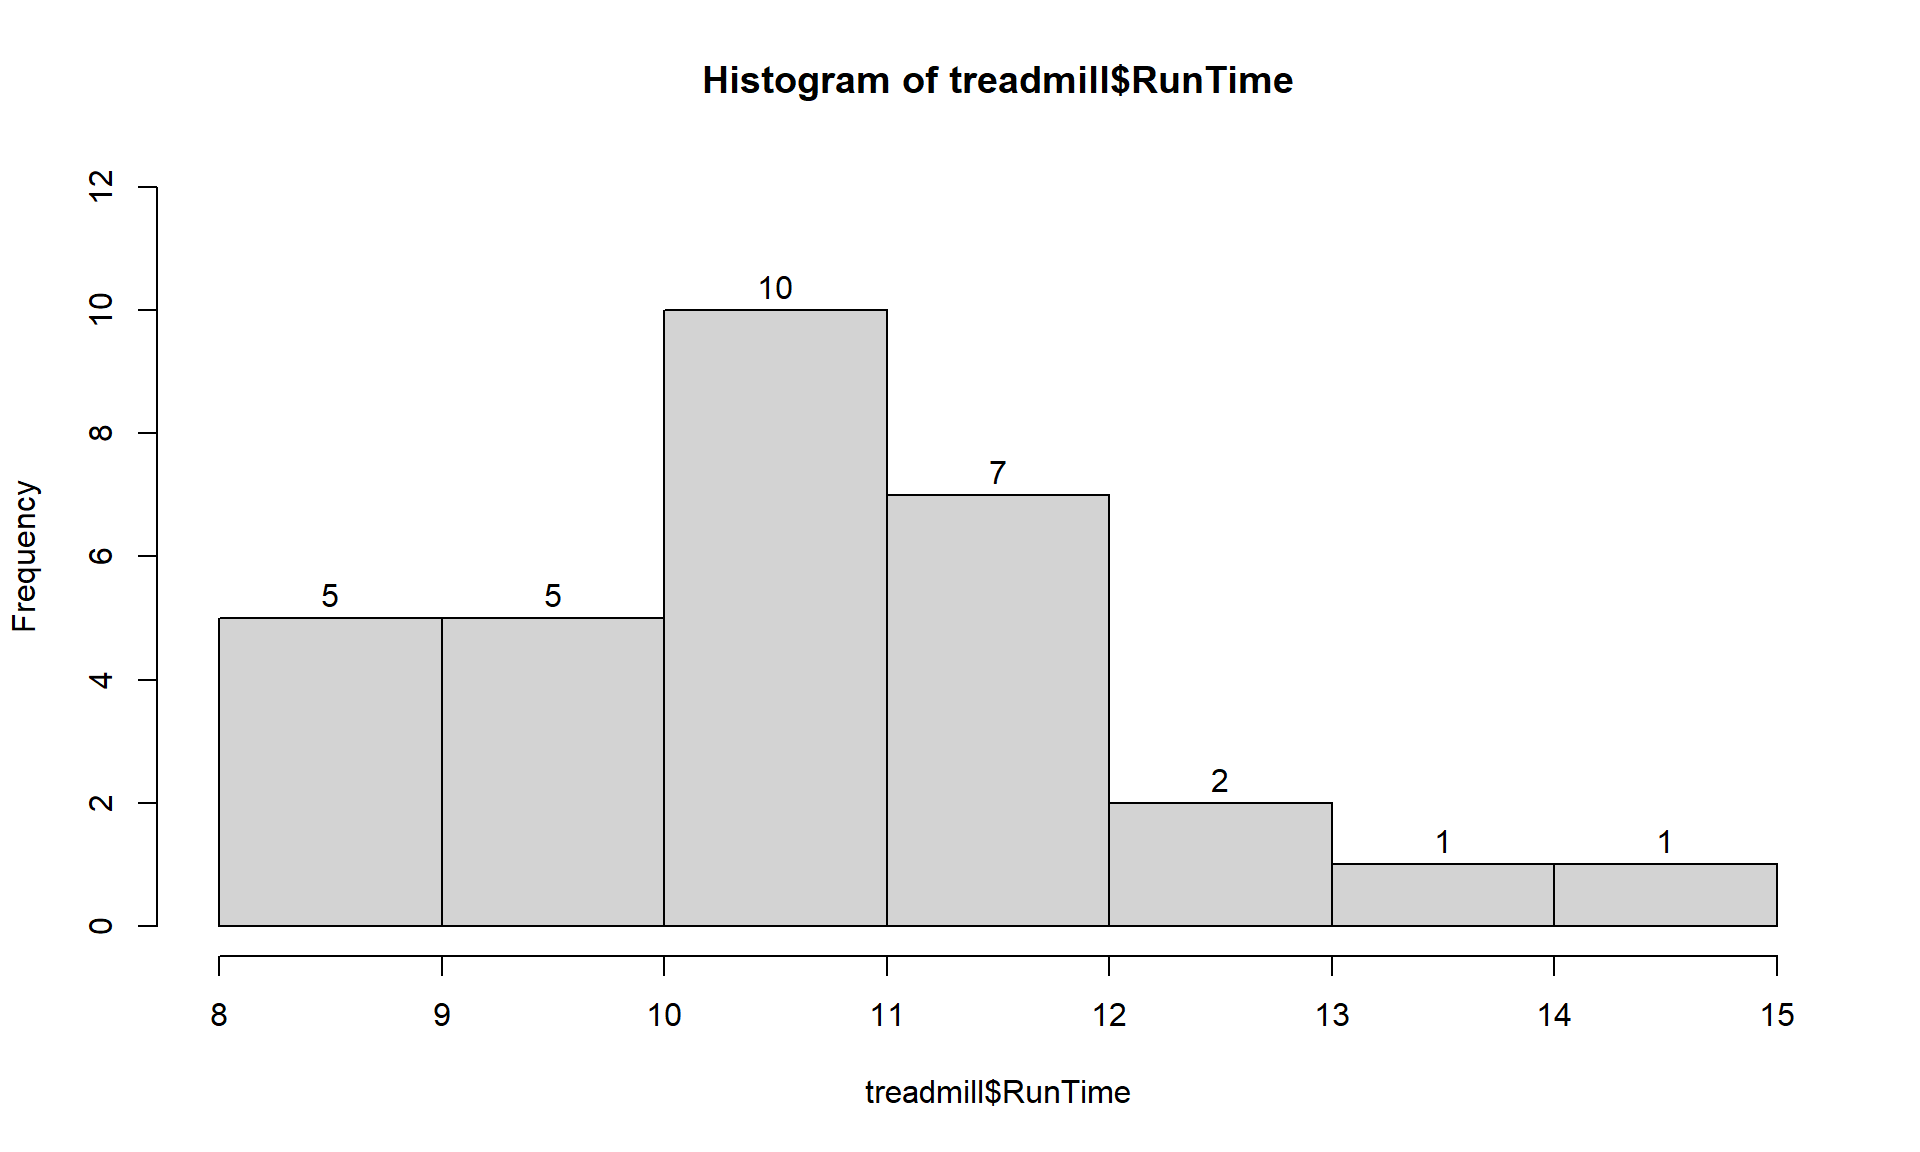 Histogram of Run Times with counts in bars labeled.